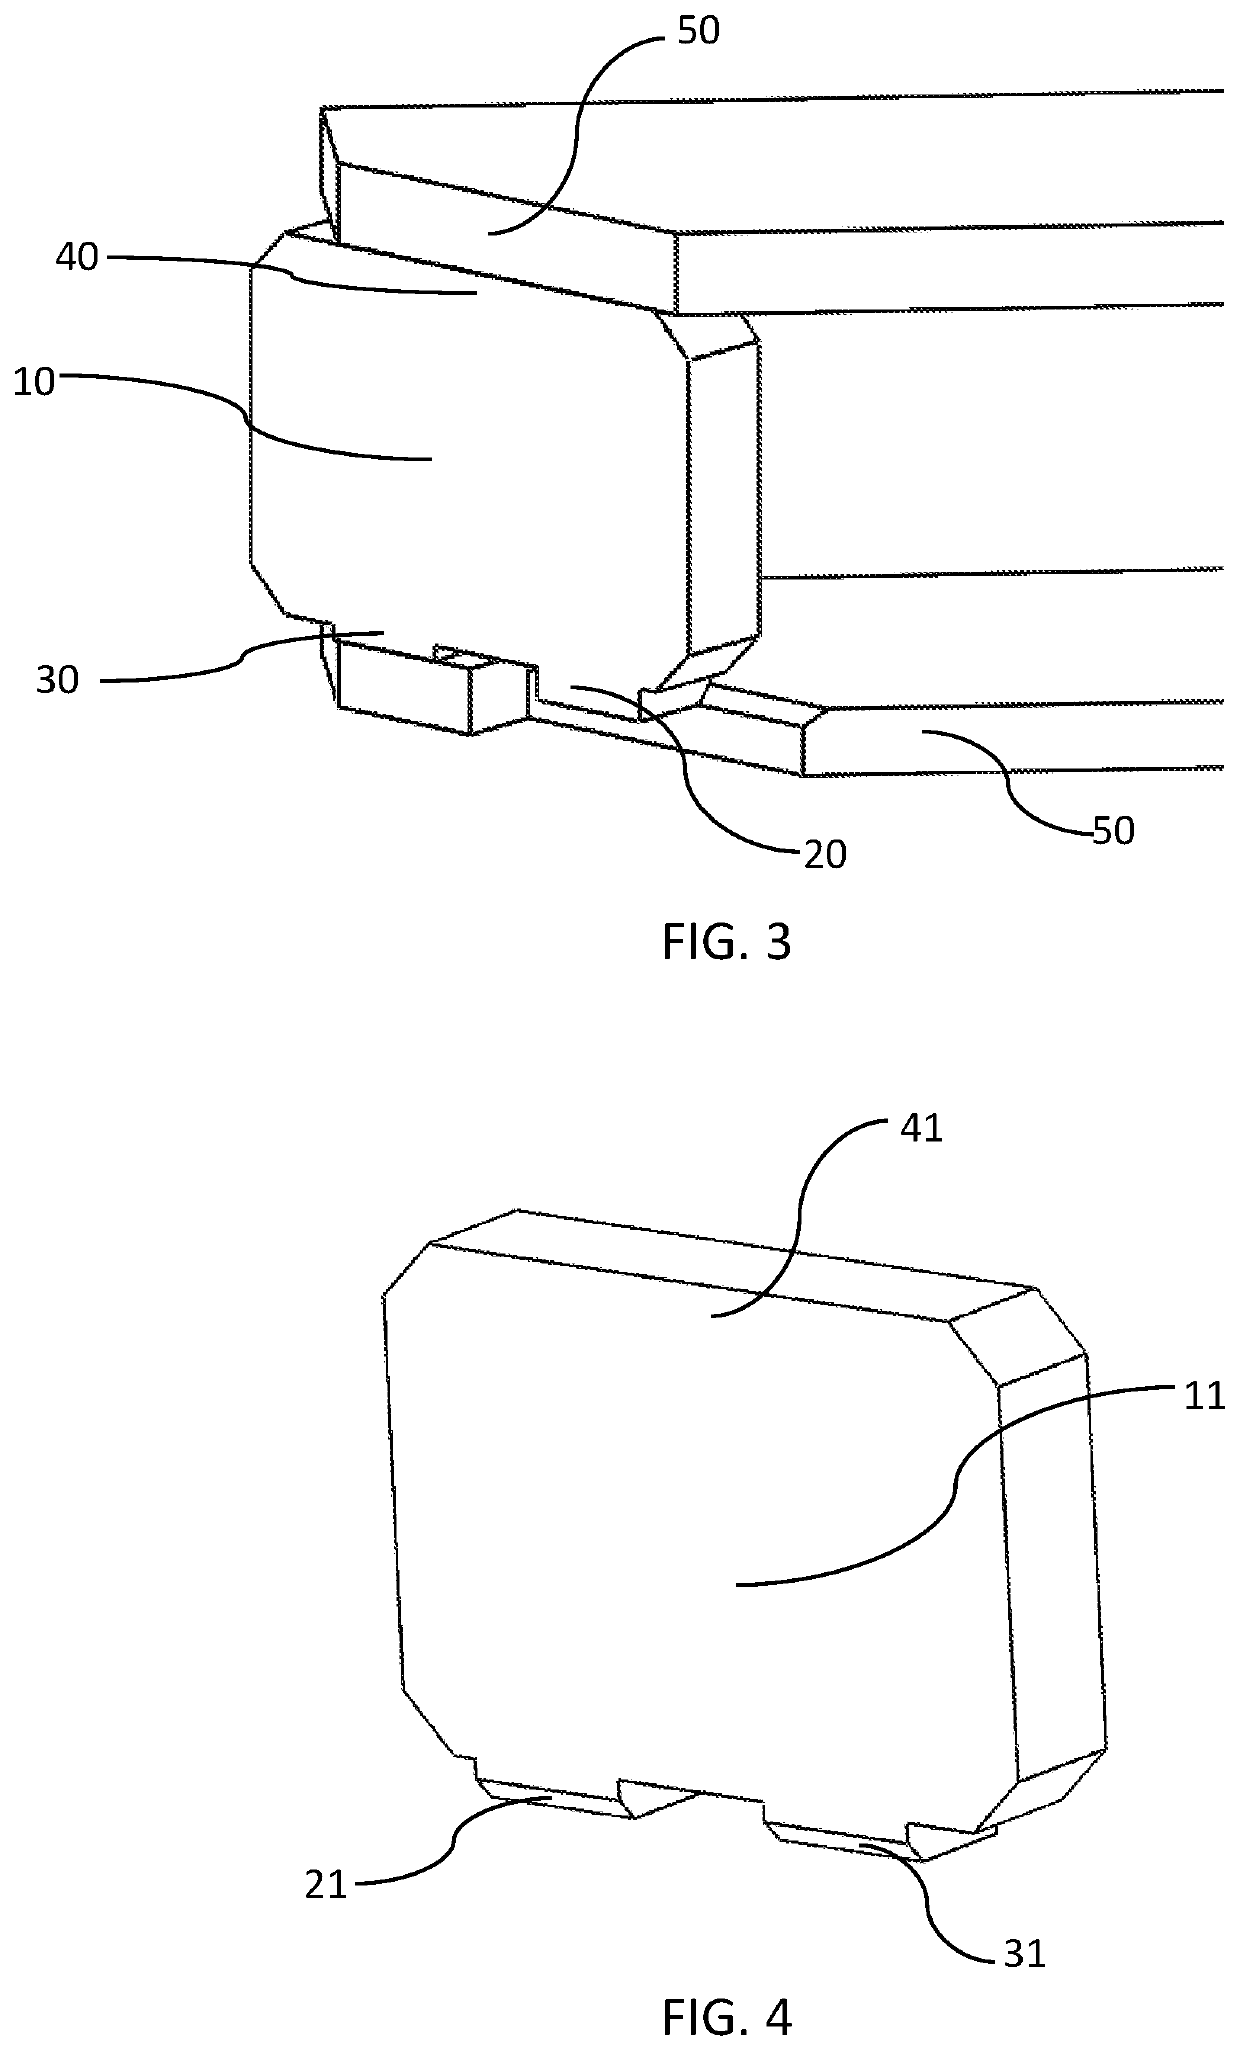 Mirror-based assemblies, including lateral transfer hollow retroreflectors, and their mounting structures and mounting methods